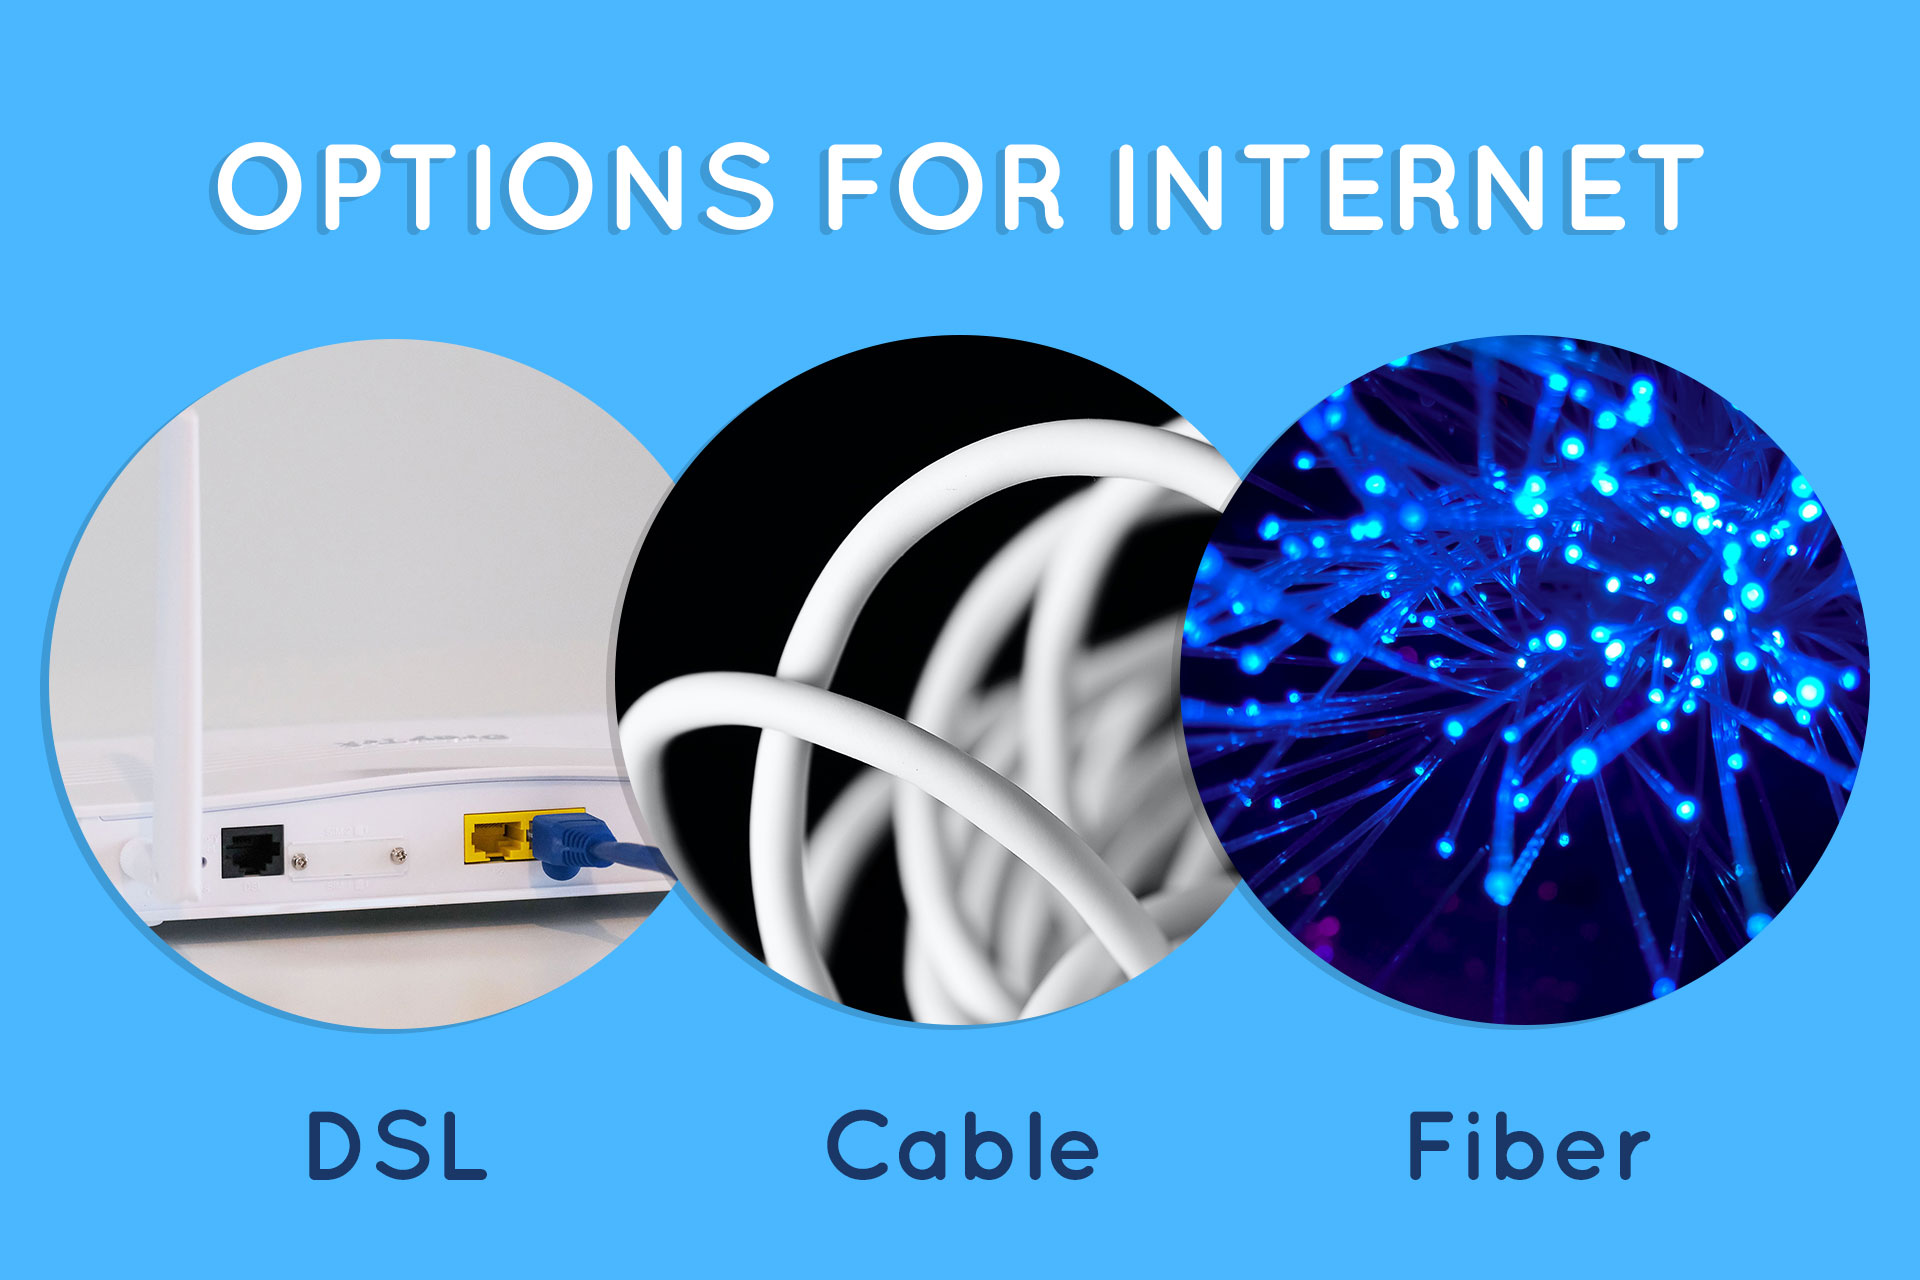 DSL, Cable and Fiber: Options for Internet